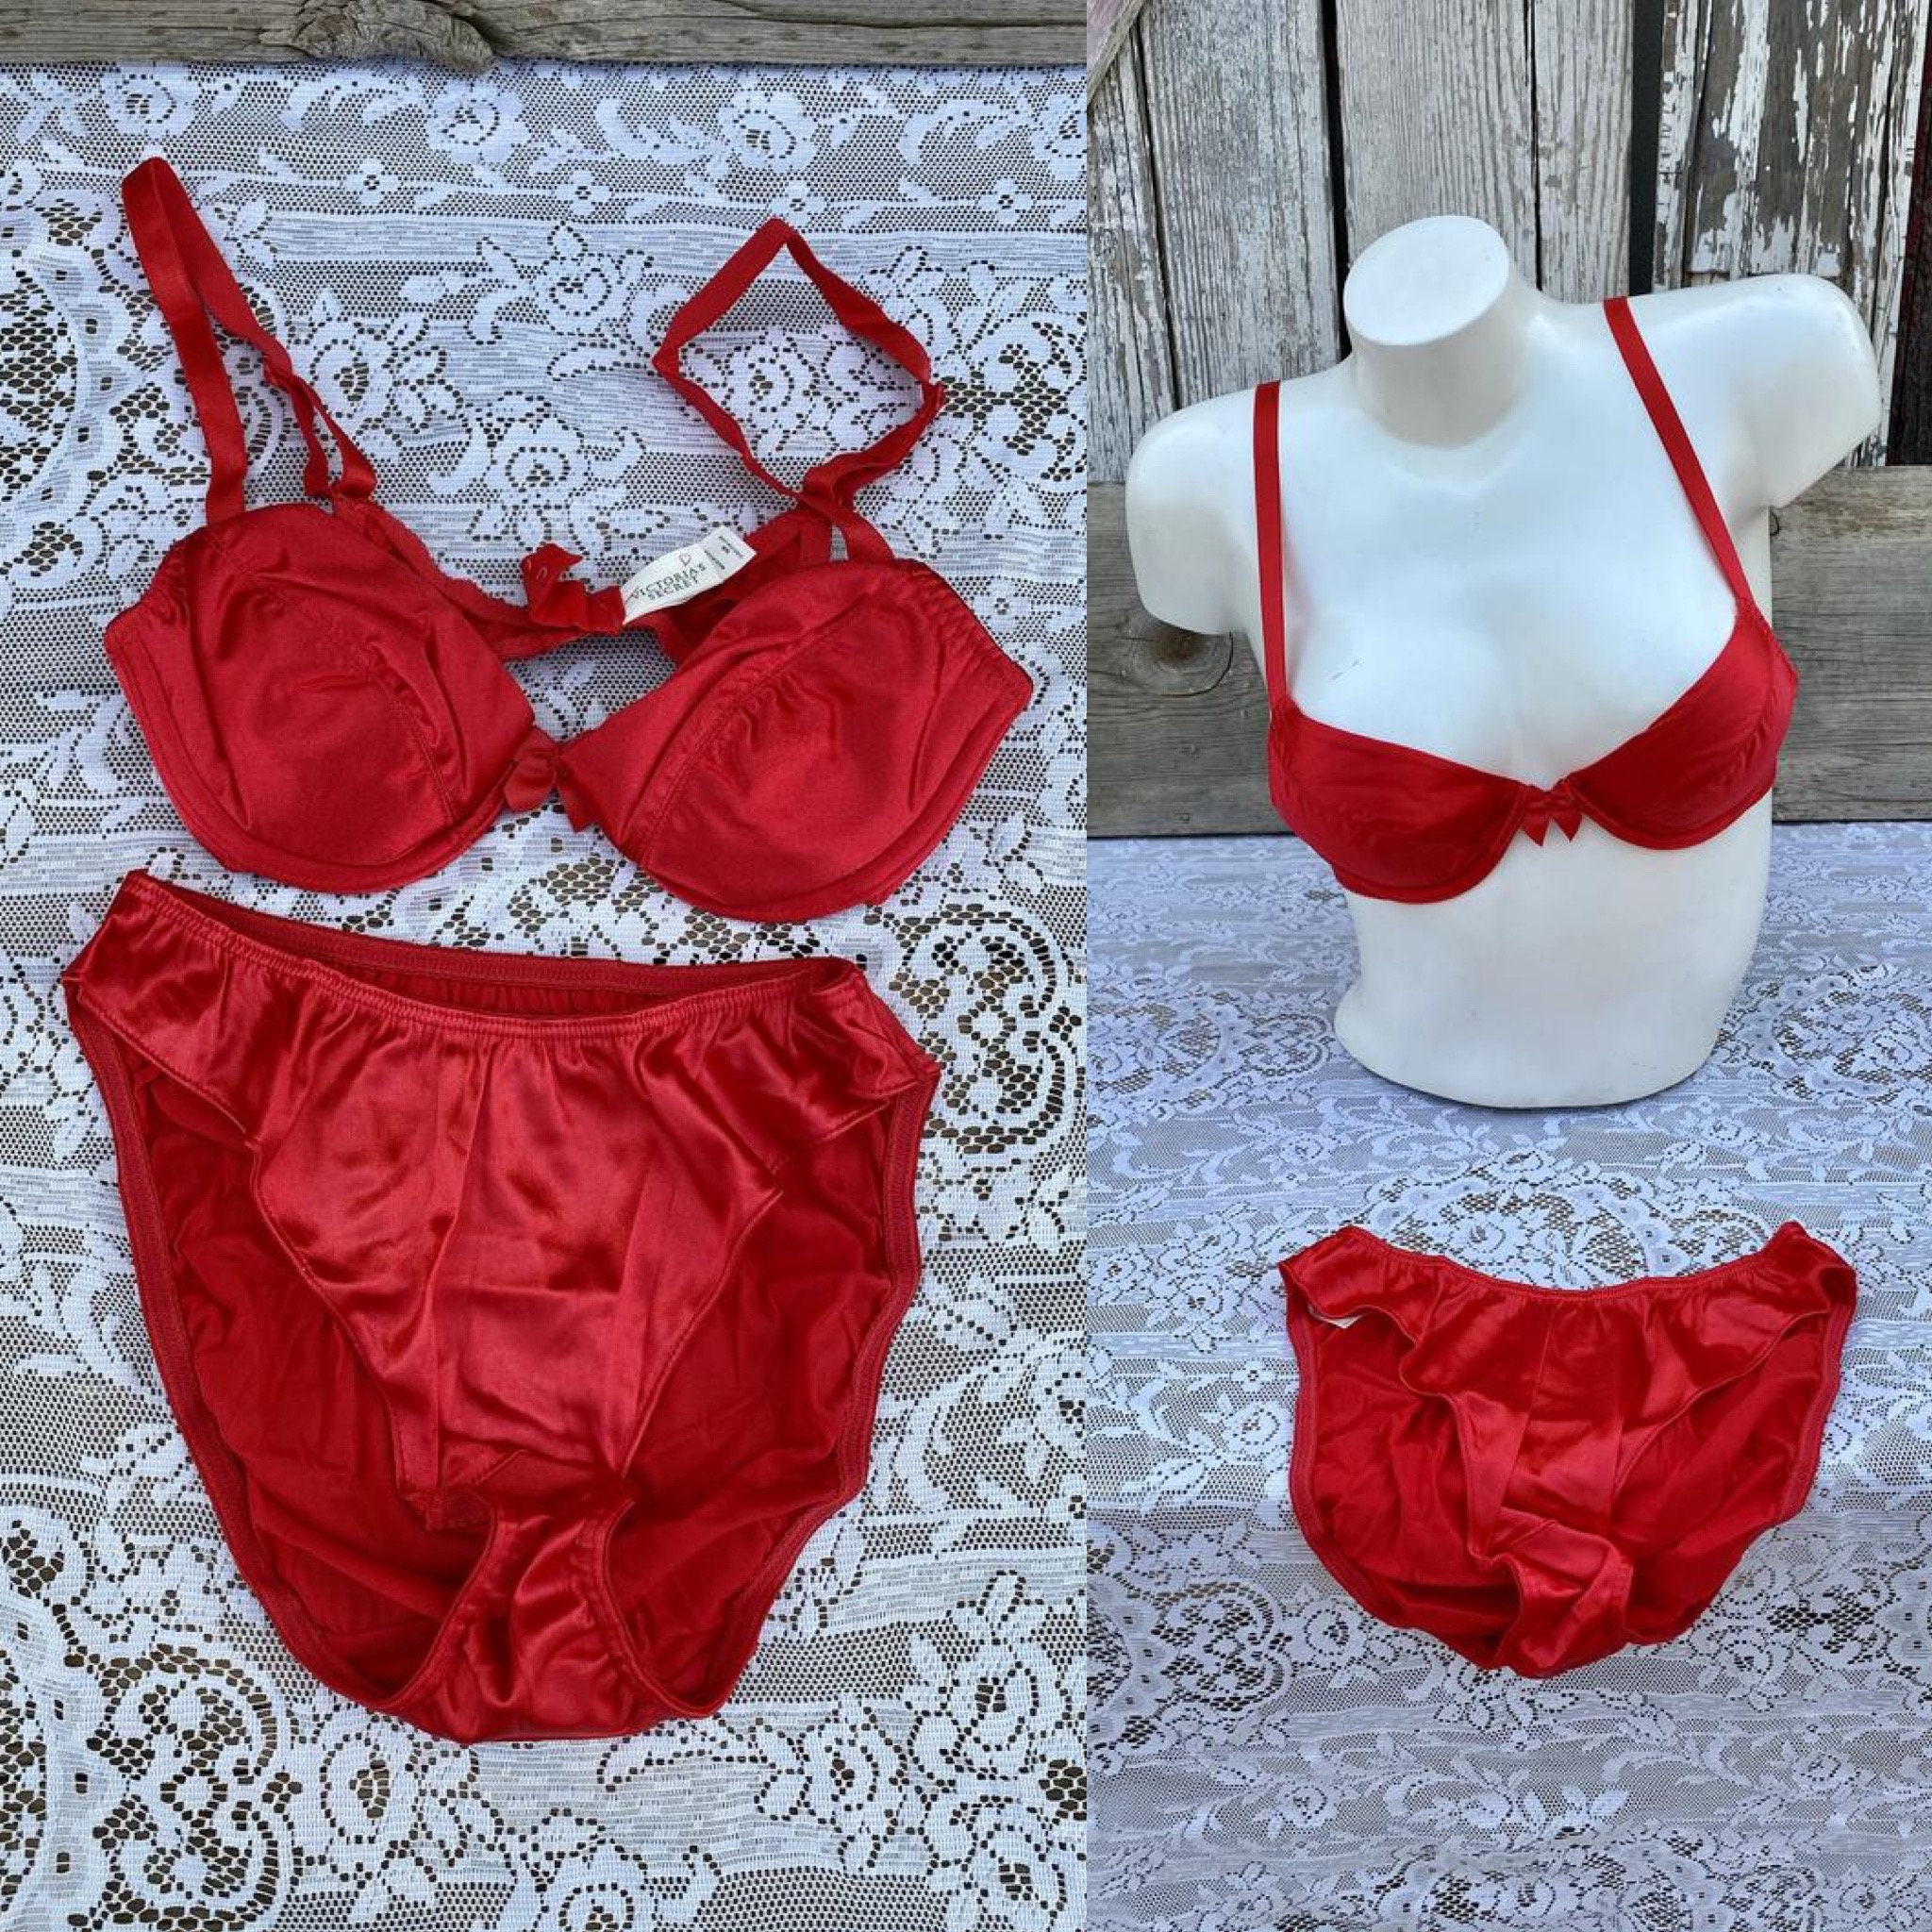 1995 Victoria's Secret 2 Piece Set Red Satin Miracle Bra 32B With Matching  Red Bikini Panties Size S NEW Old Stock 